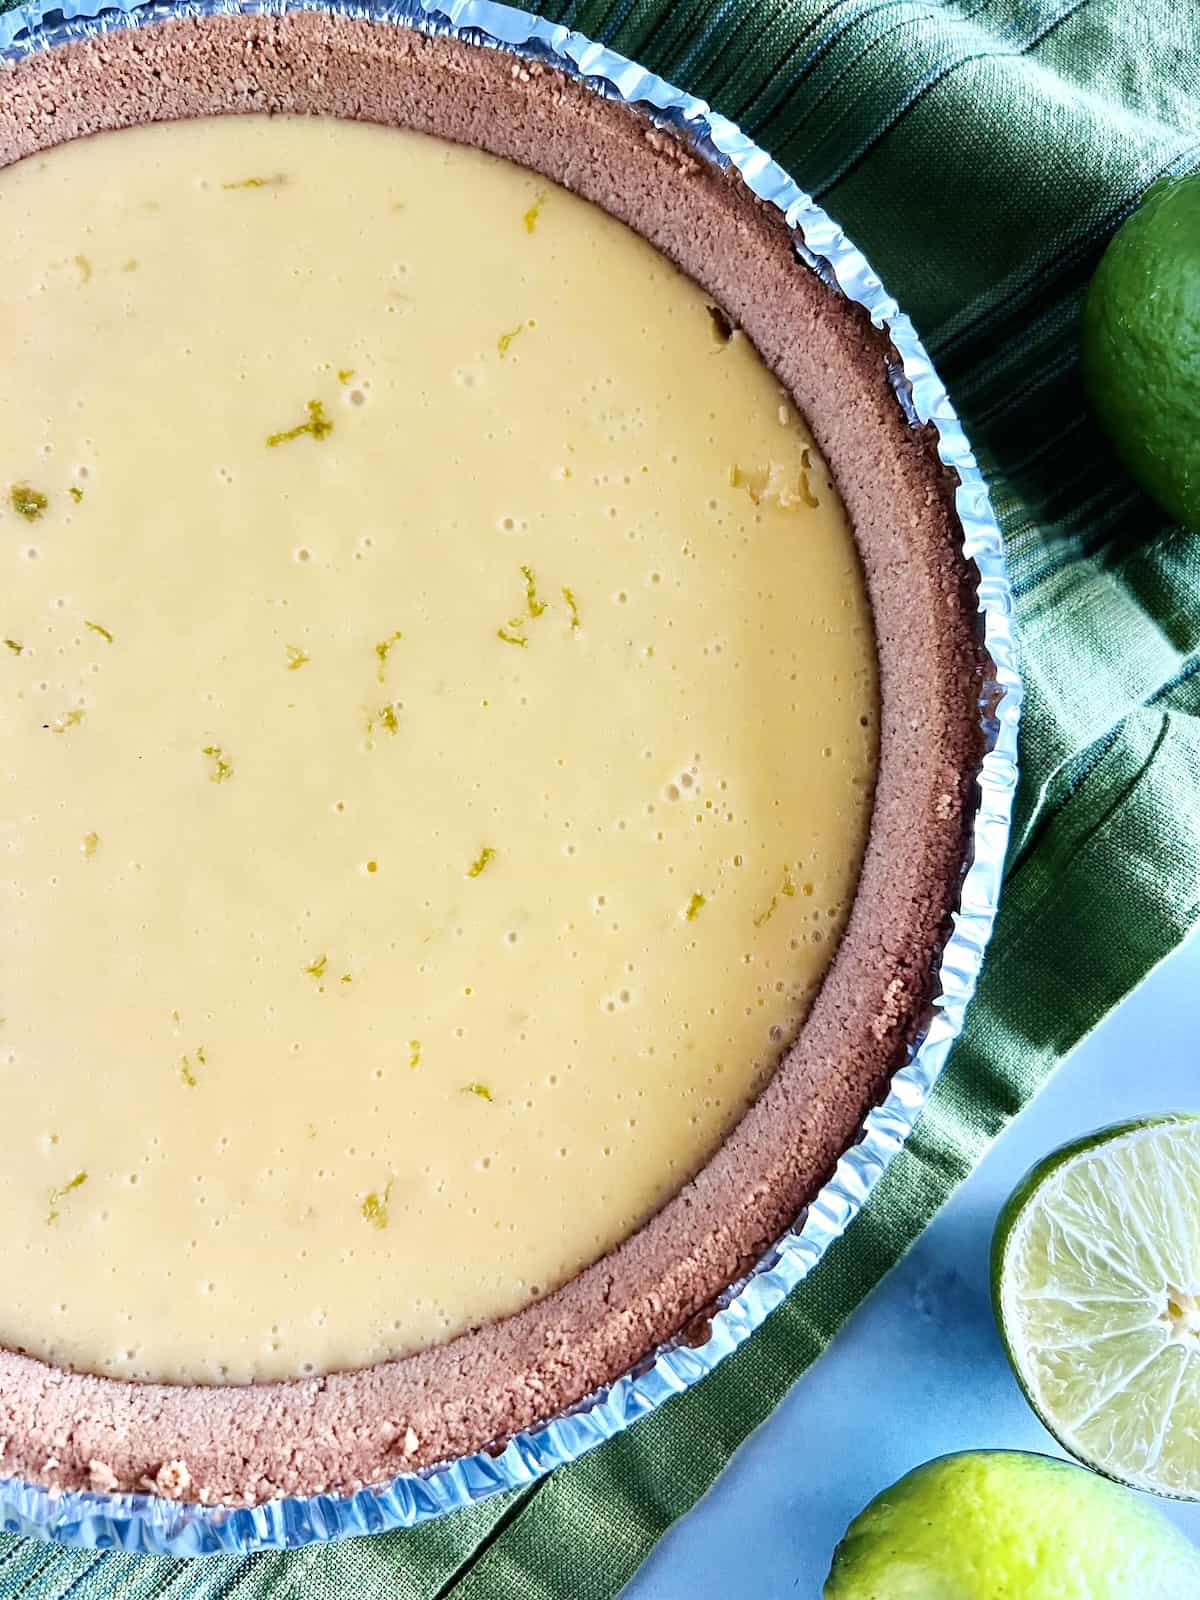 Key lime pie done baking with golden yellow color with specks of green zest on top. 